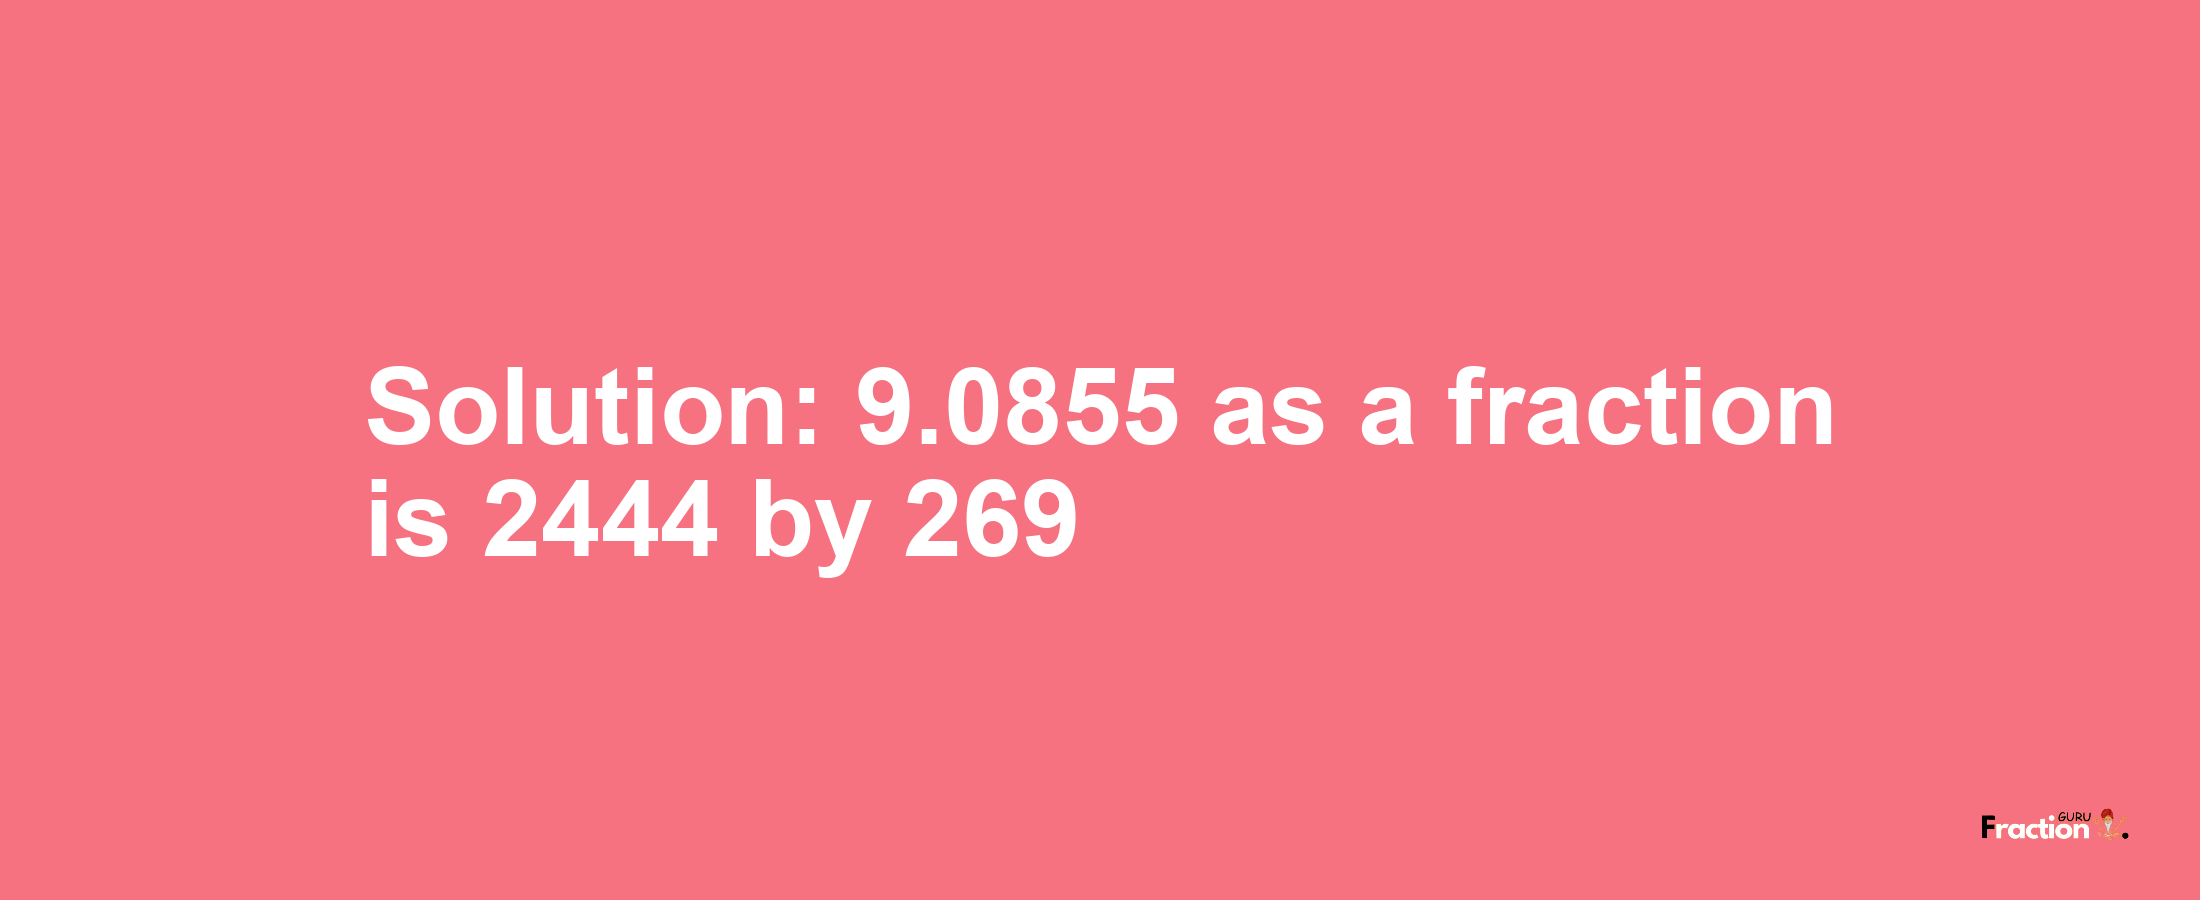 Solution:9.0855 as a fraction is 2444/269